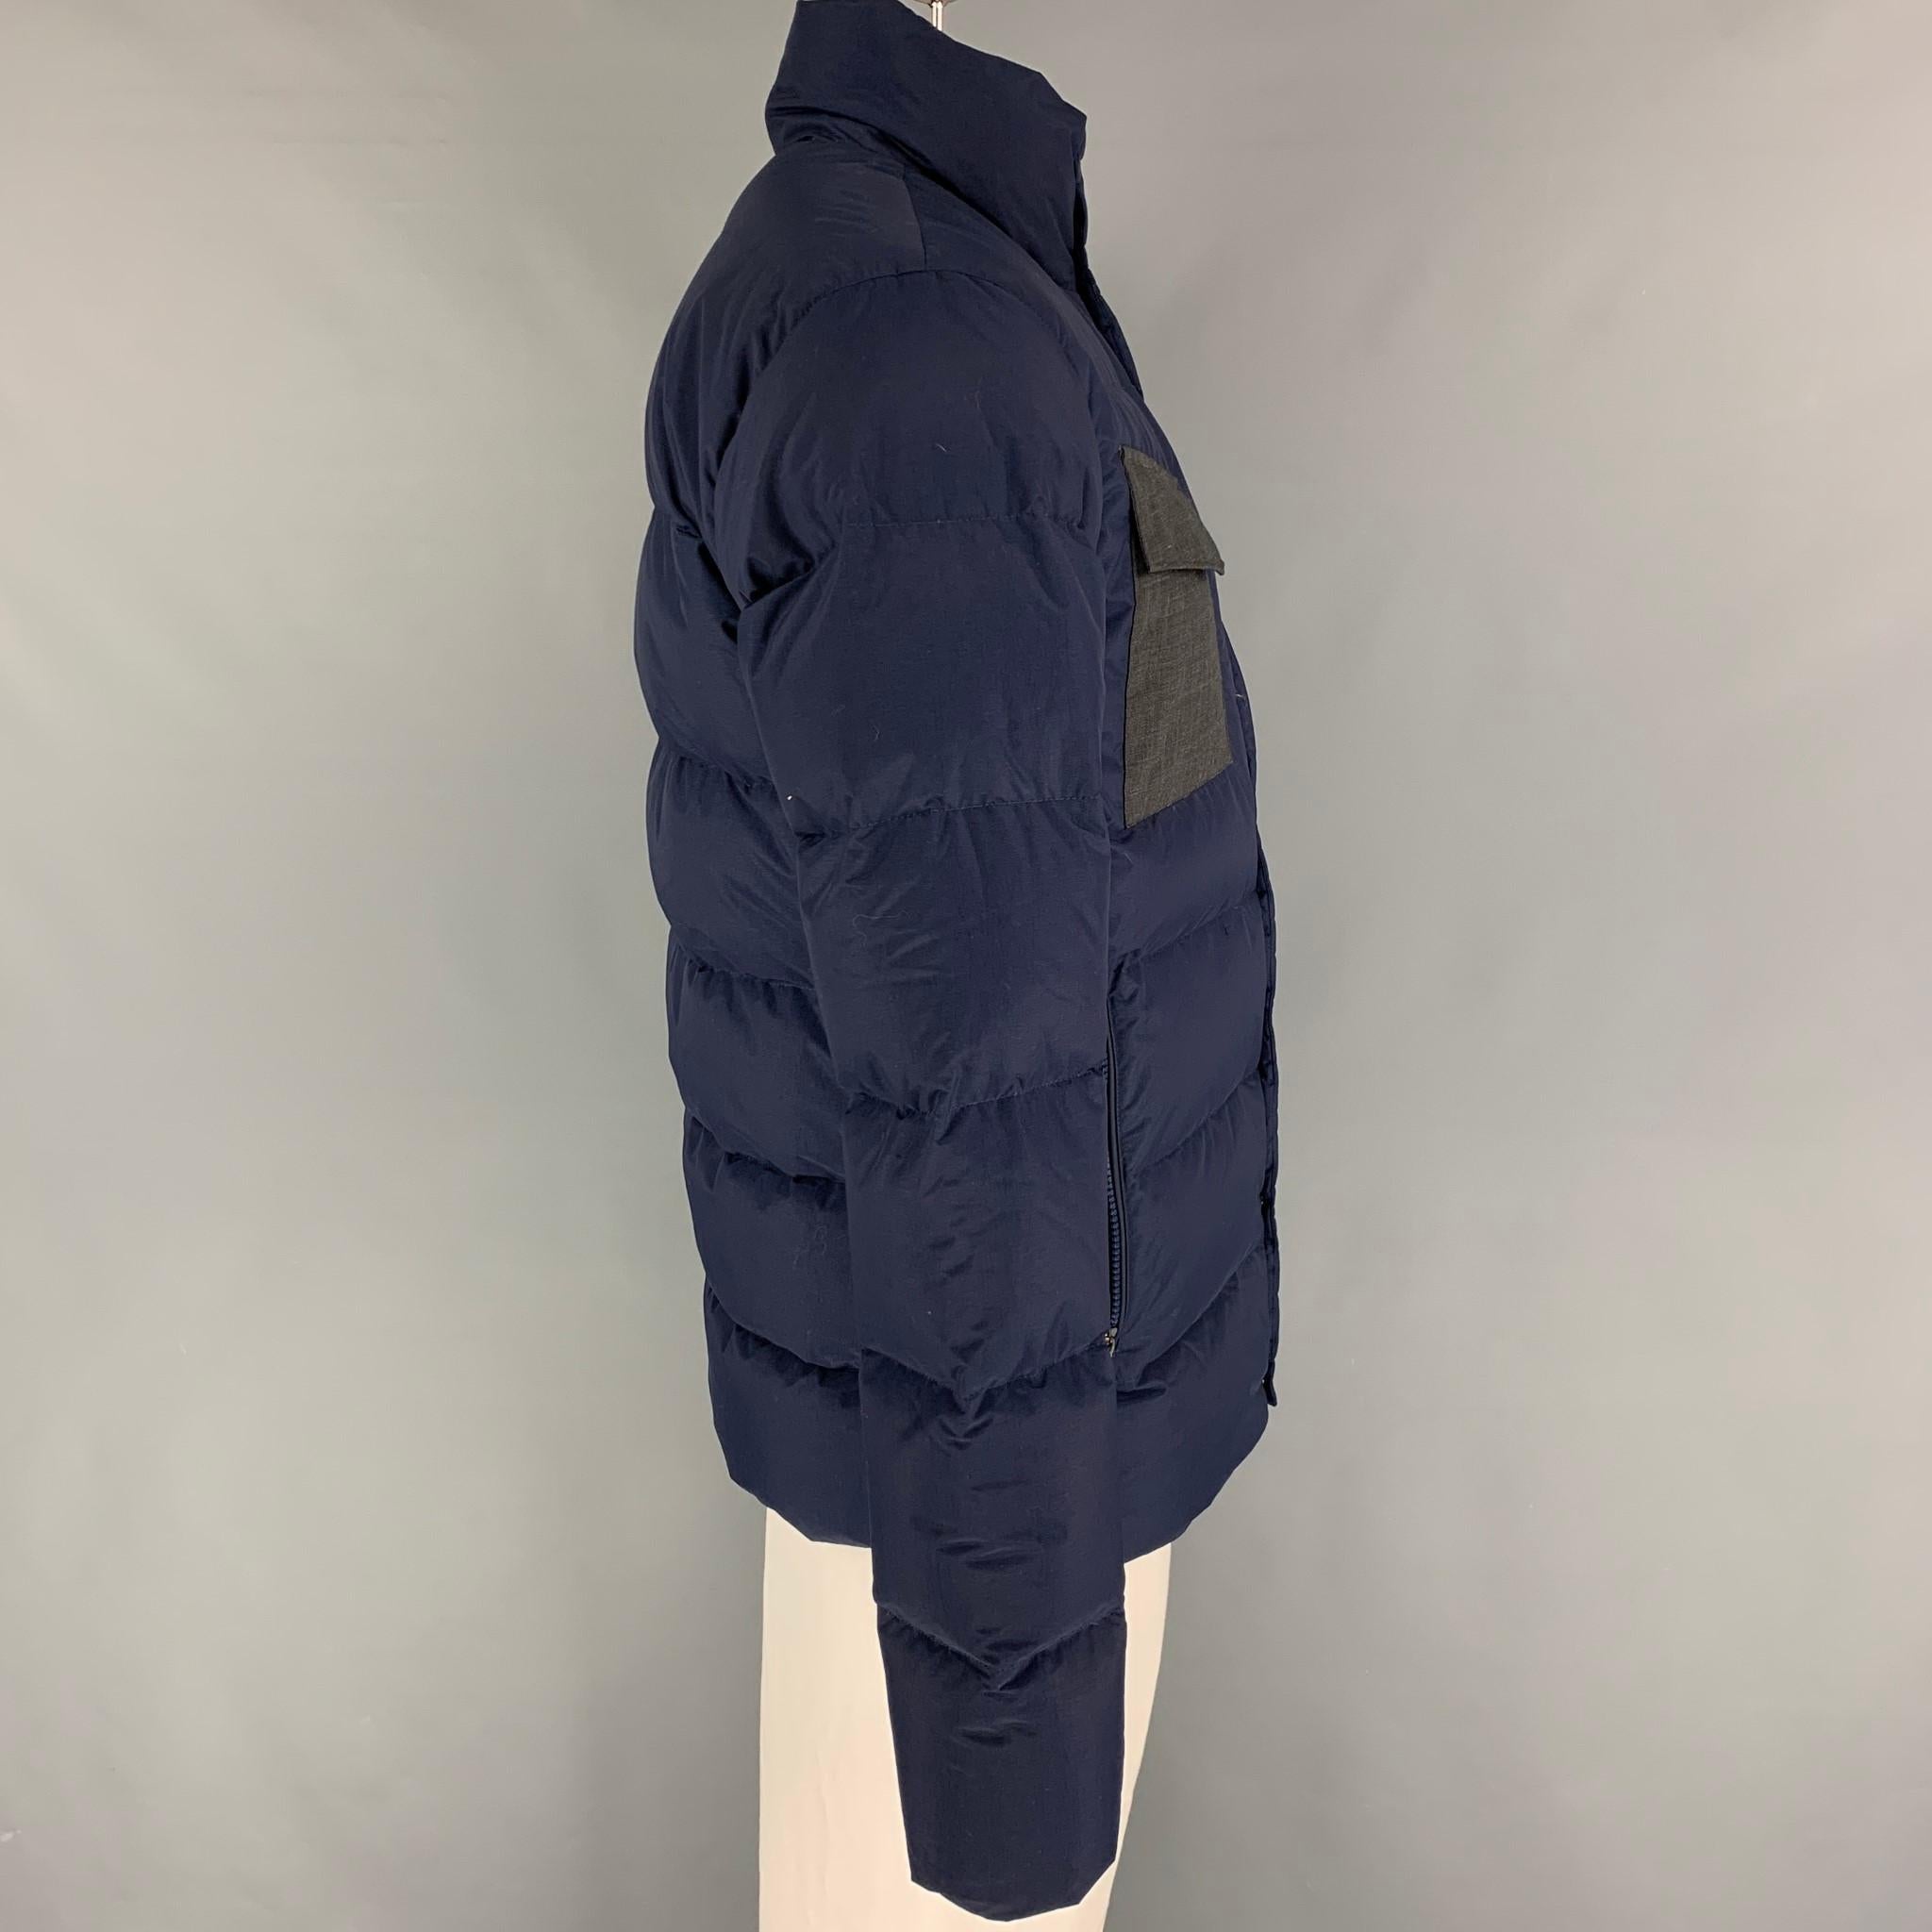 KJUS jacket comes in a navy & grey quilted polyamide with premium down fill featuring a high collar, patch pockets, sleeve logo detail, and a snap button closure. 

Excellent Pre-Owned Condition.
Marked: 50/M

Measurements:

Shoulder: 19 in.
Chest: